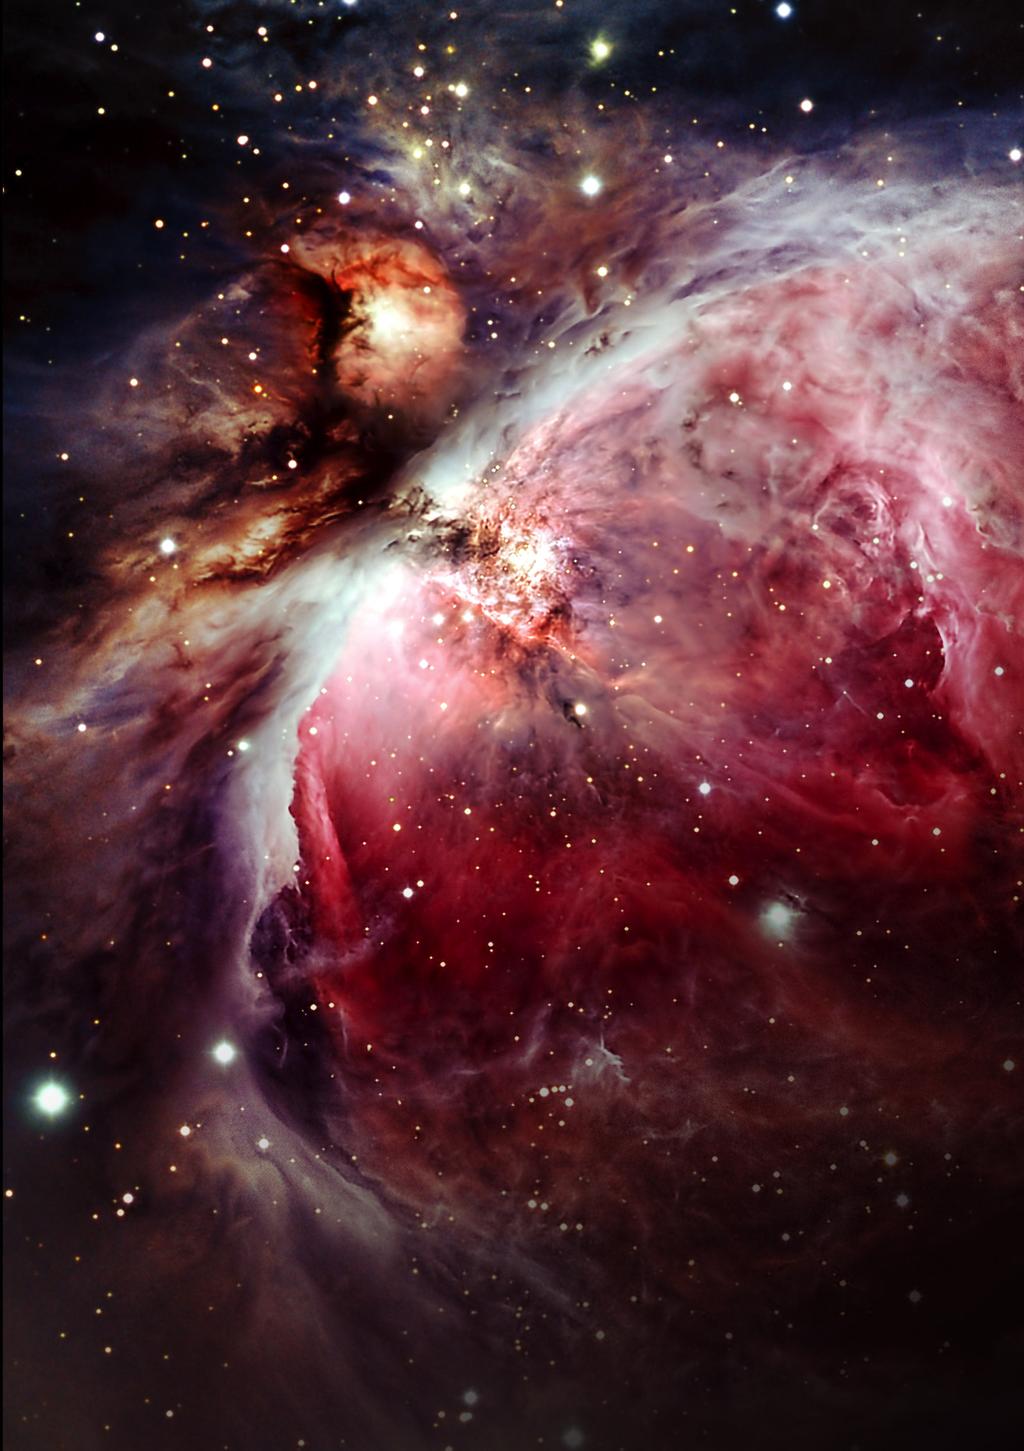 M42 - The Great Orion Nebula. M42 is an emission and reflection nebula in the constellation Orion.